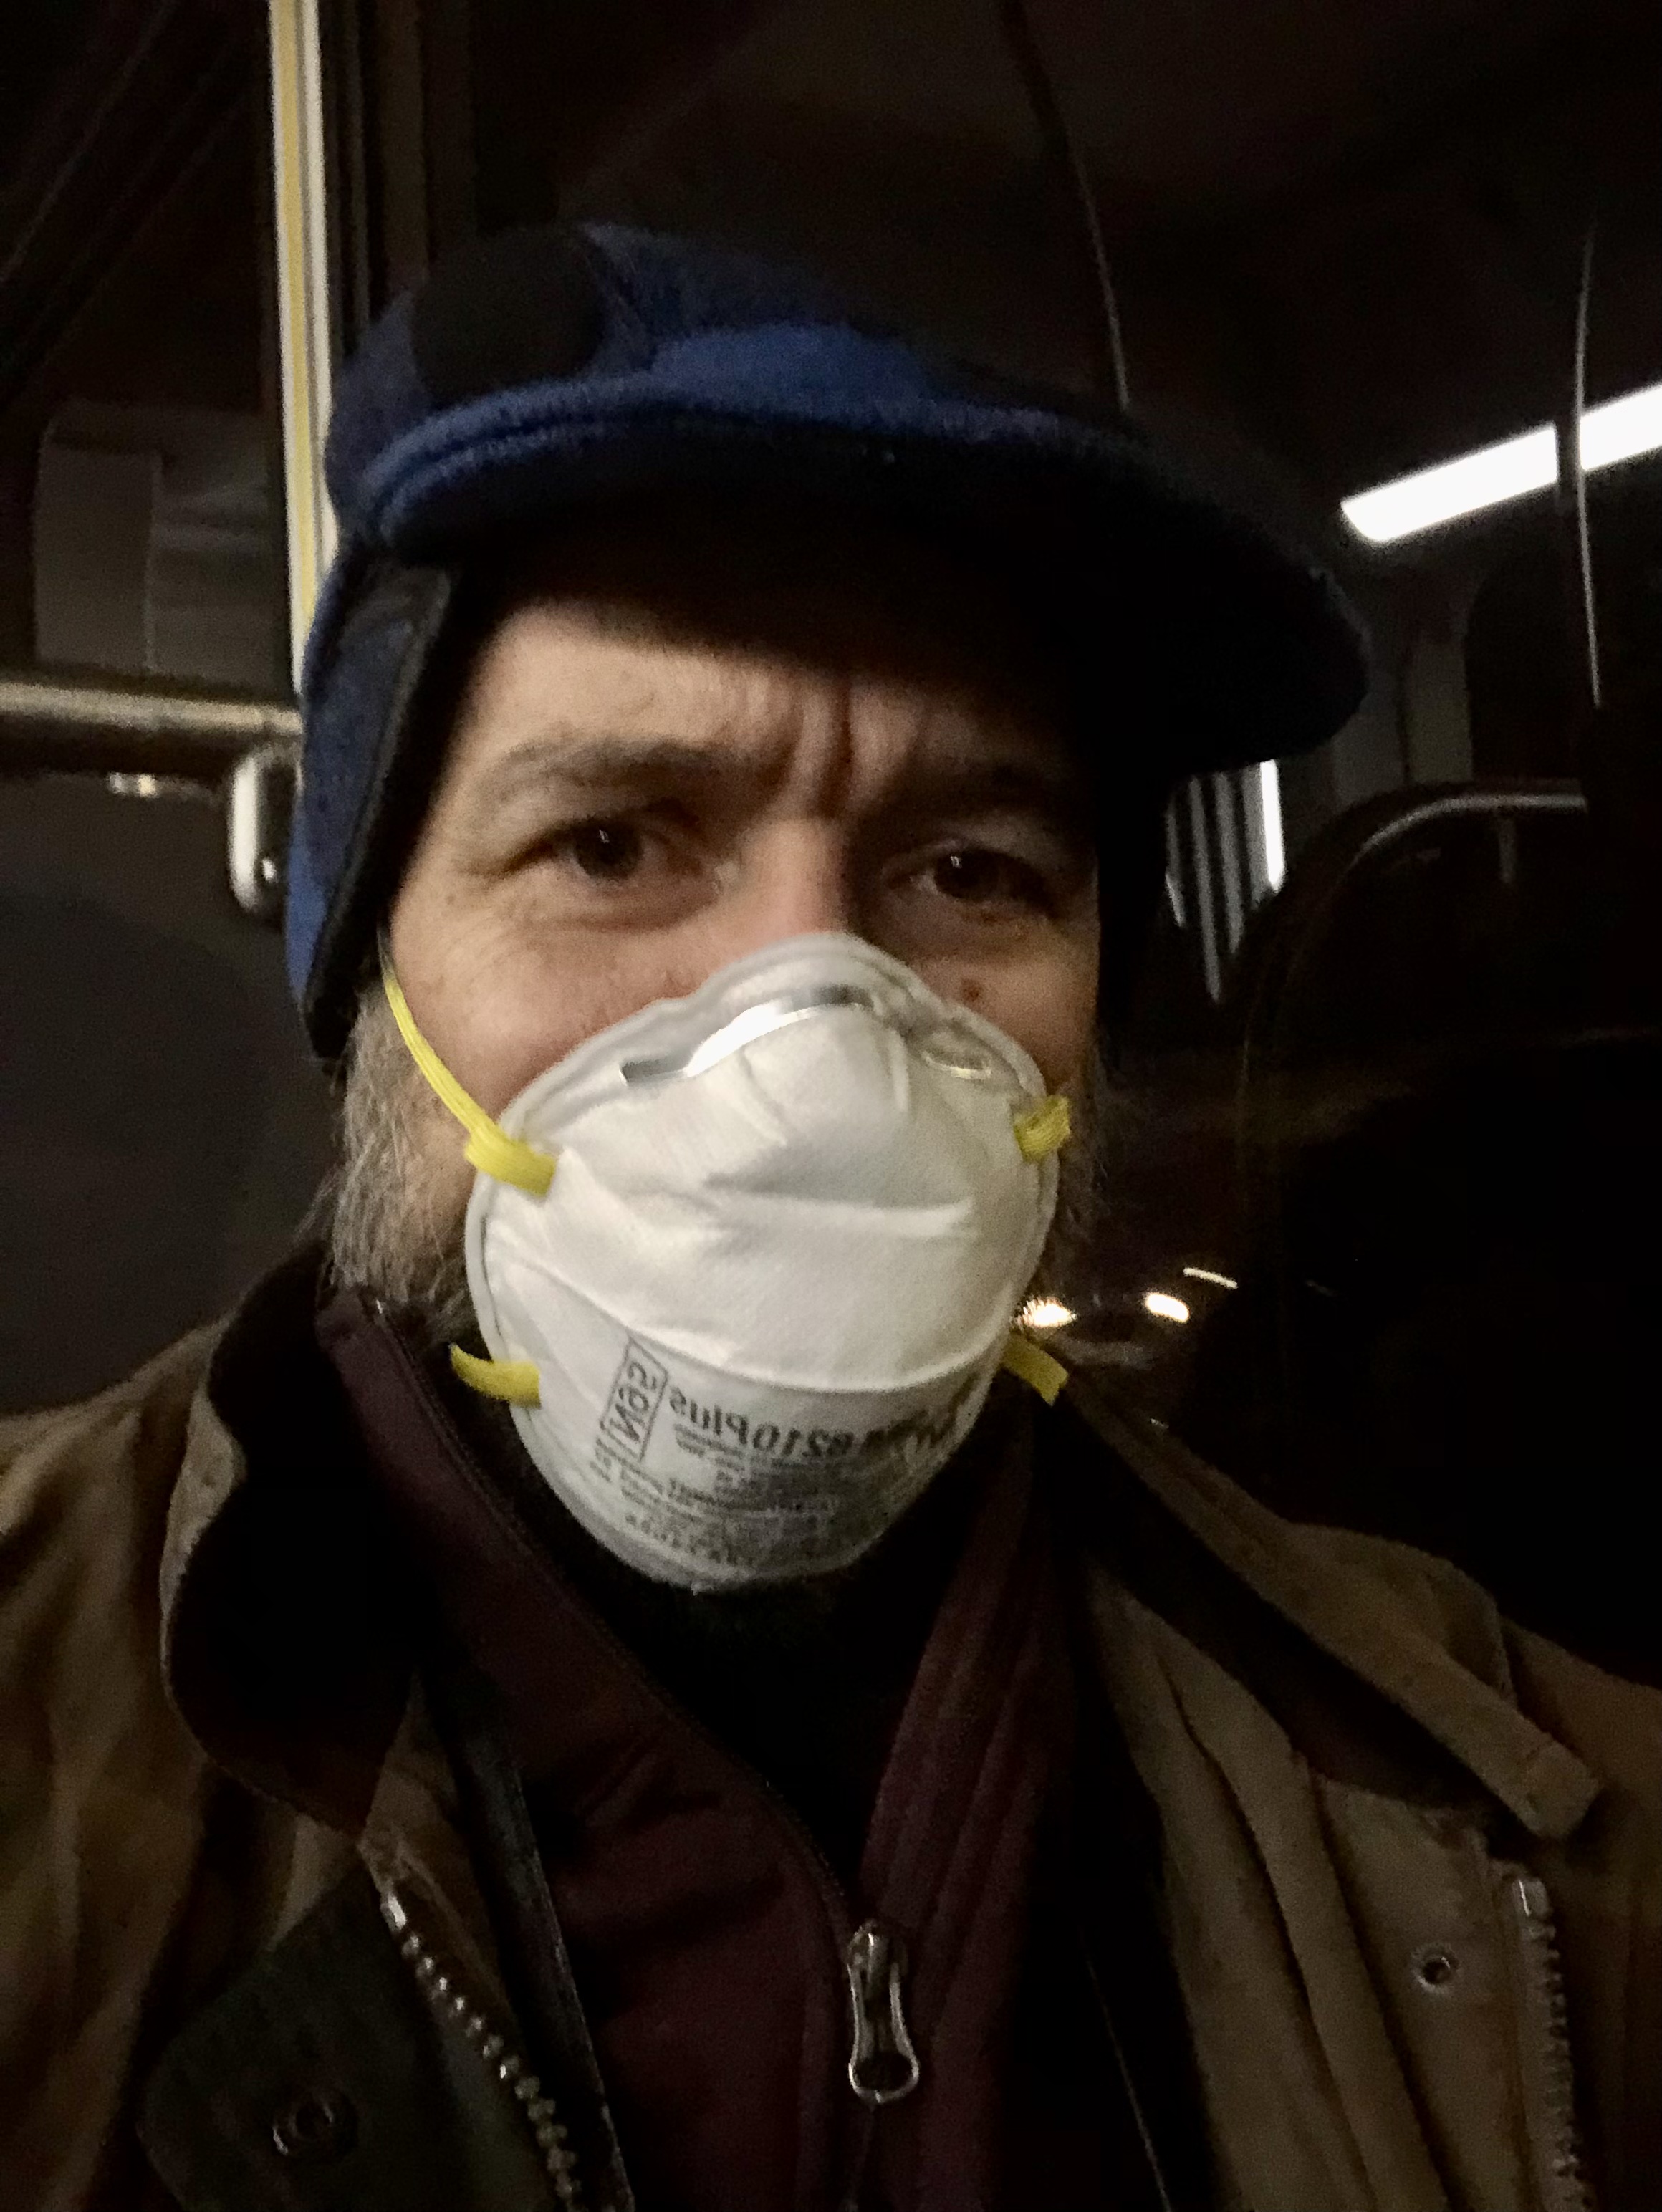 Me on the bus, wearing a mask and a blue hat.